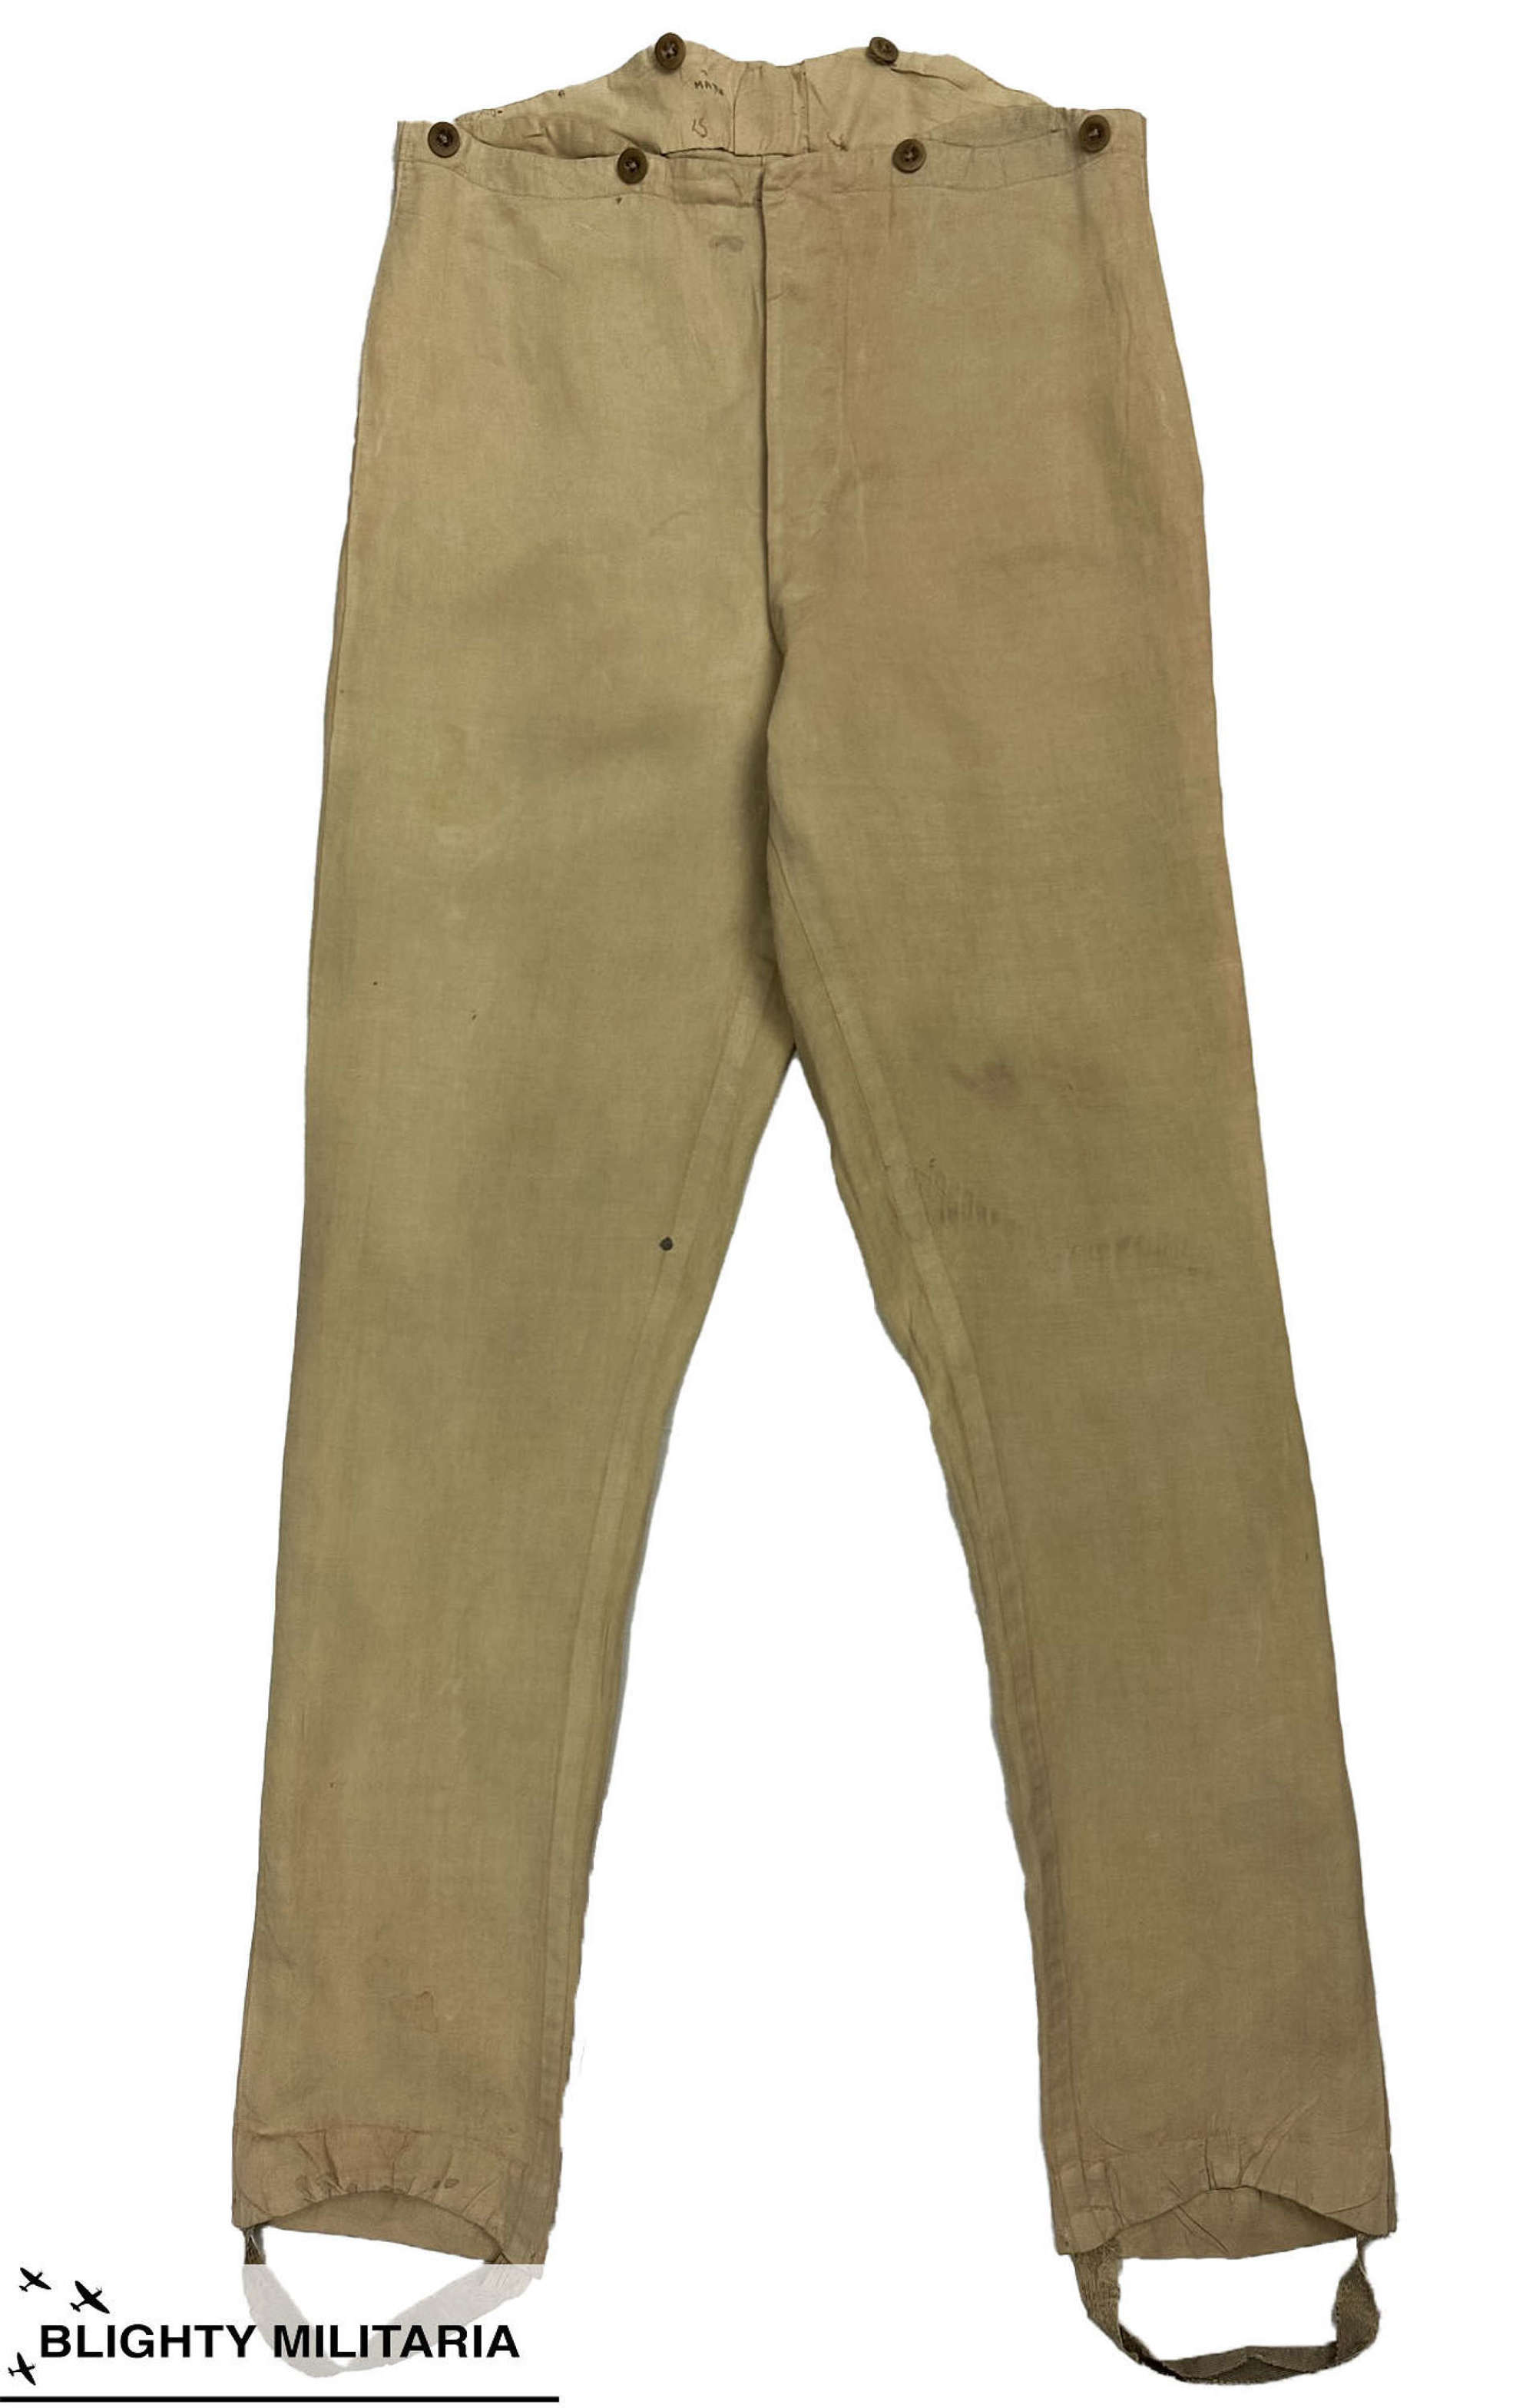 Original Early 20th Century British Army Officer's Linen Trousers